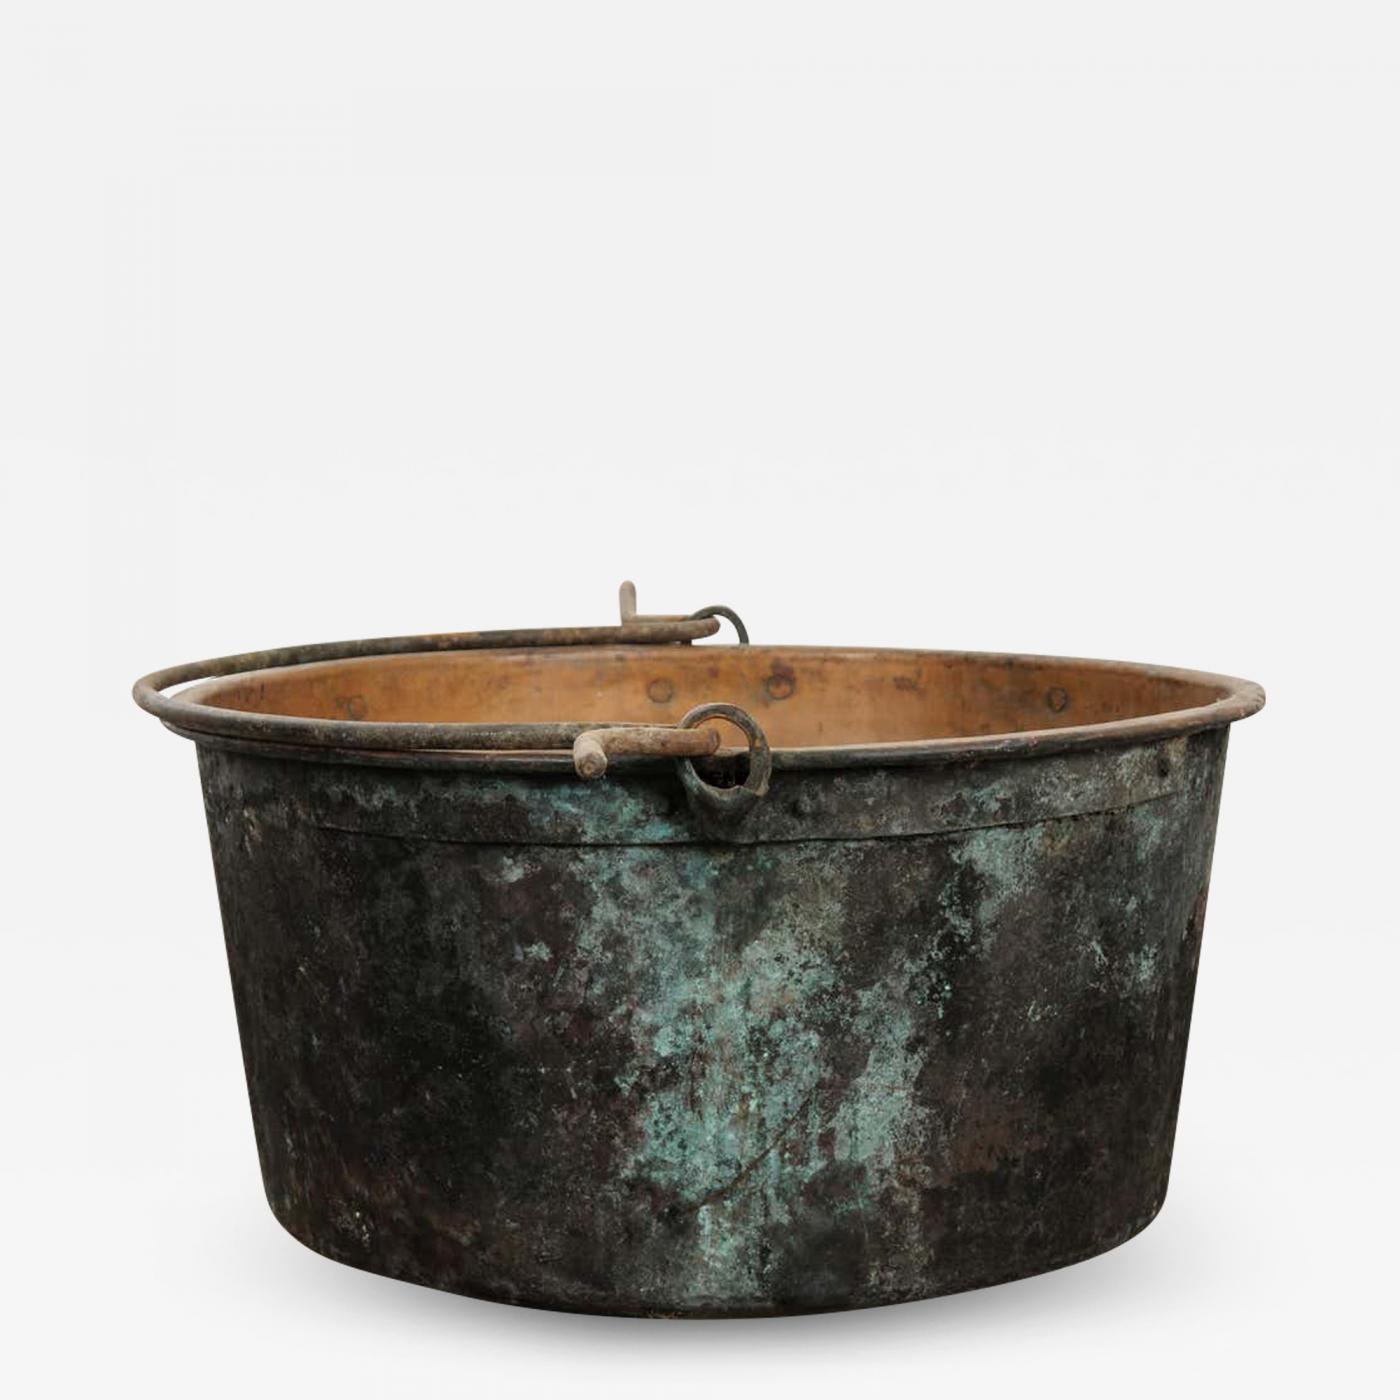 https://cdn.incollect.com/sites/default/files/zoom/Large-French-Copper-Pot-with-Iron-Hanging-Handle-393982-1554675.jpg